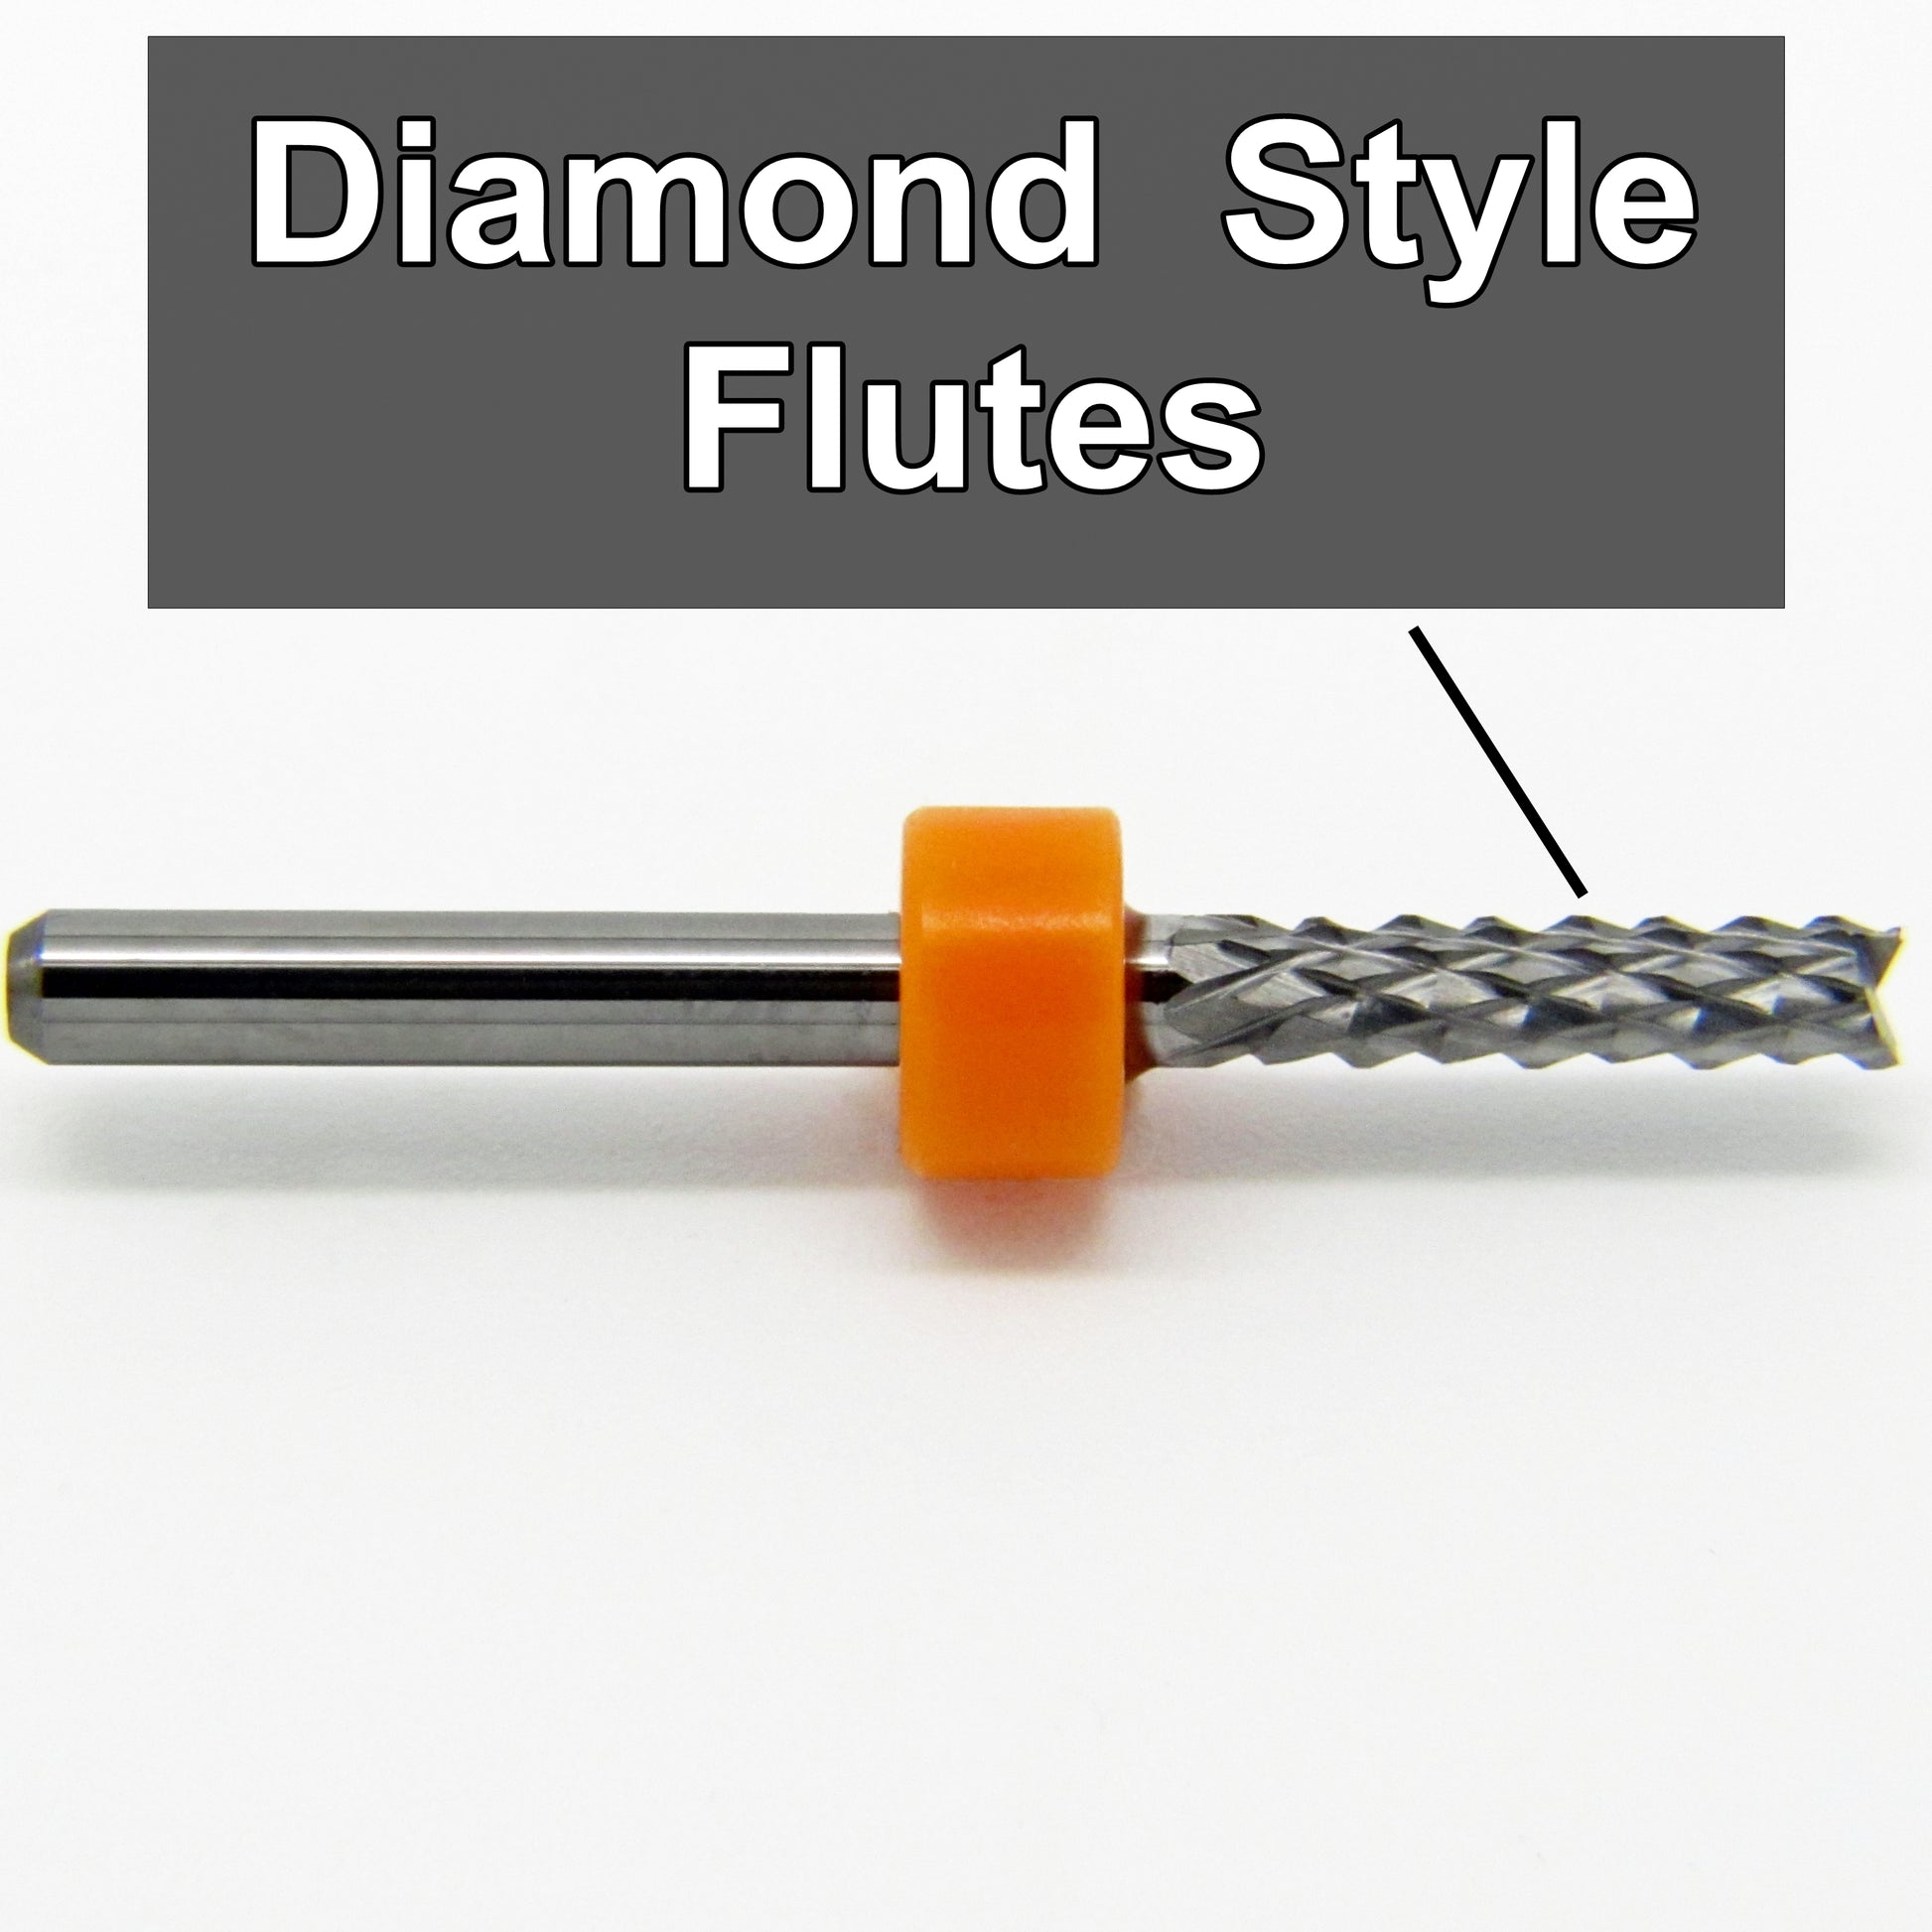 Diamond Flute Routers - Lightly Used -  Choose Your Size(s) SUPER VALUE